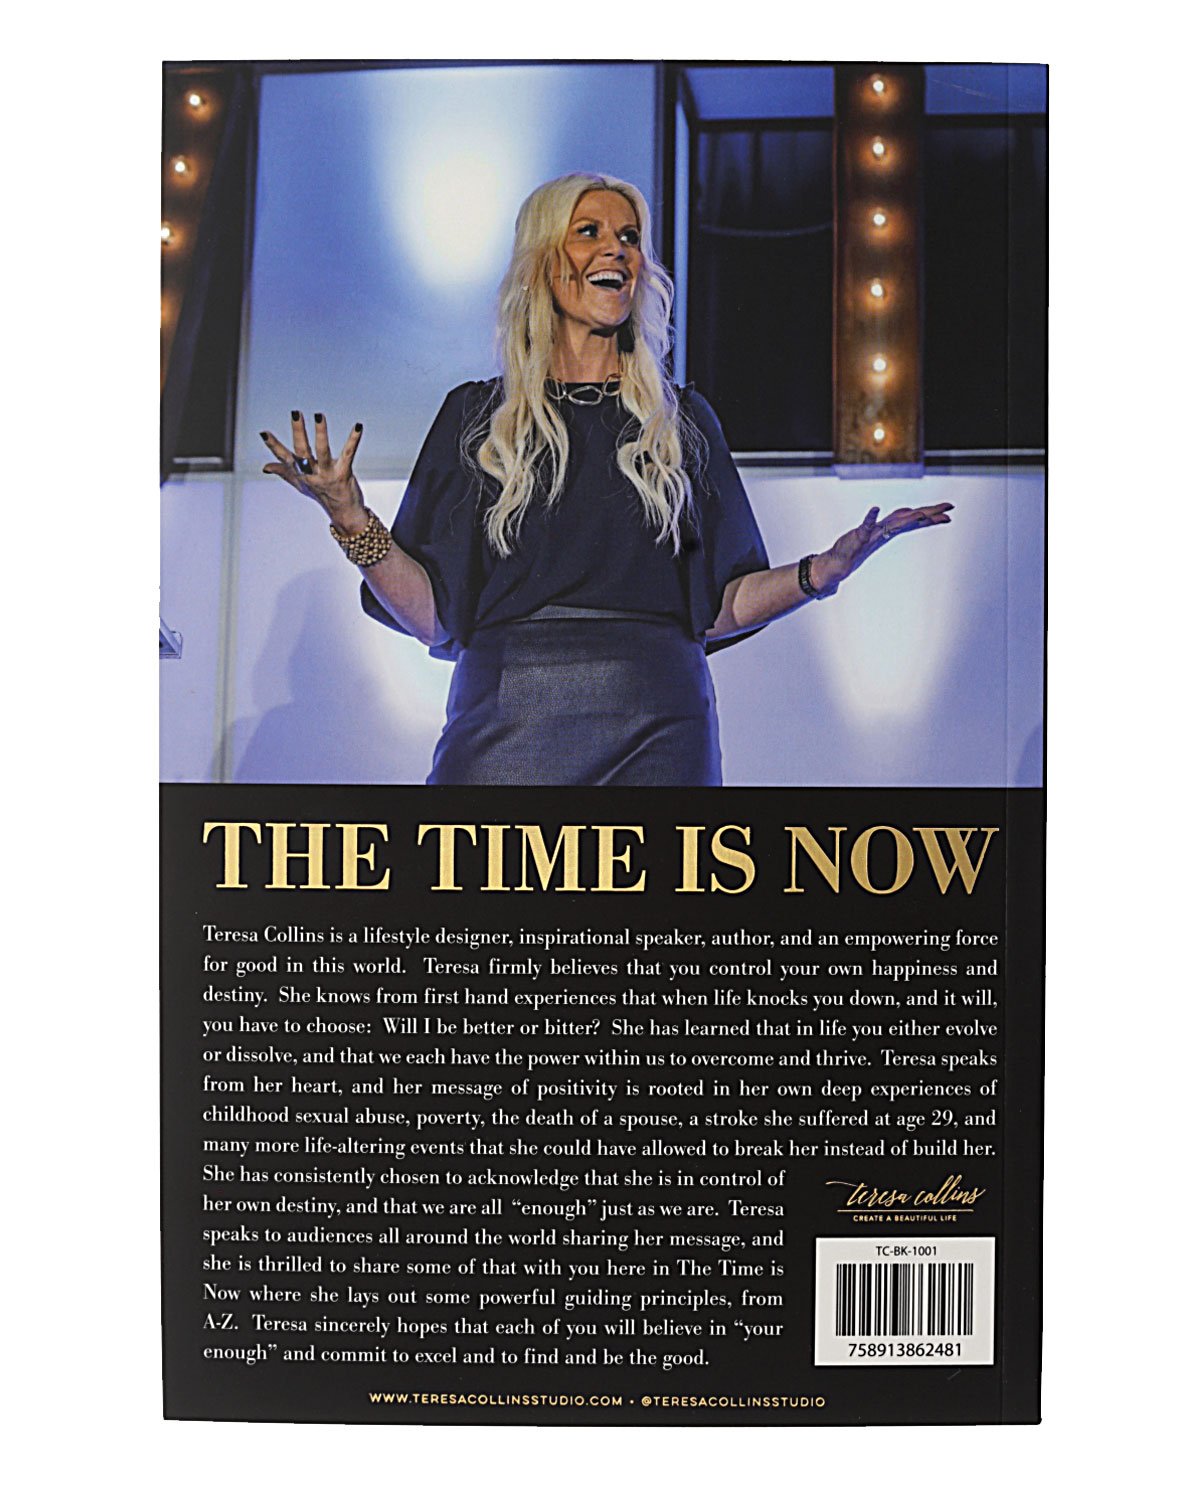 The Time Is Now, an A-Z Guide Book - Teresa Collins Studio